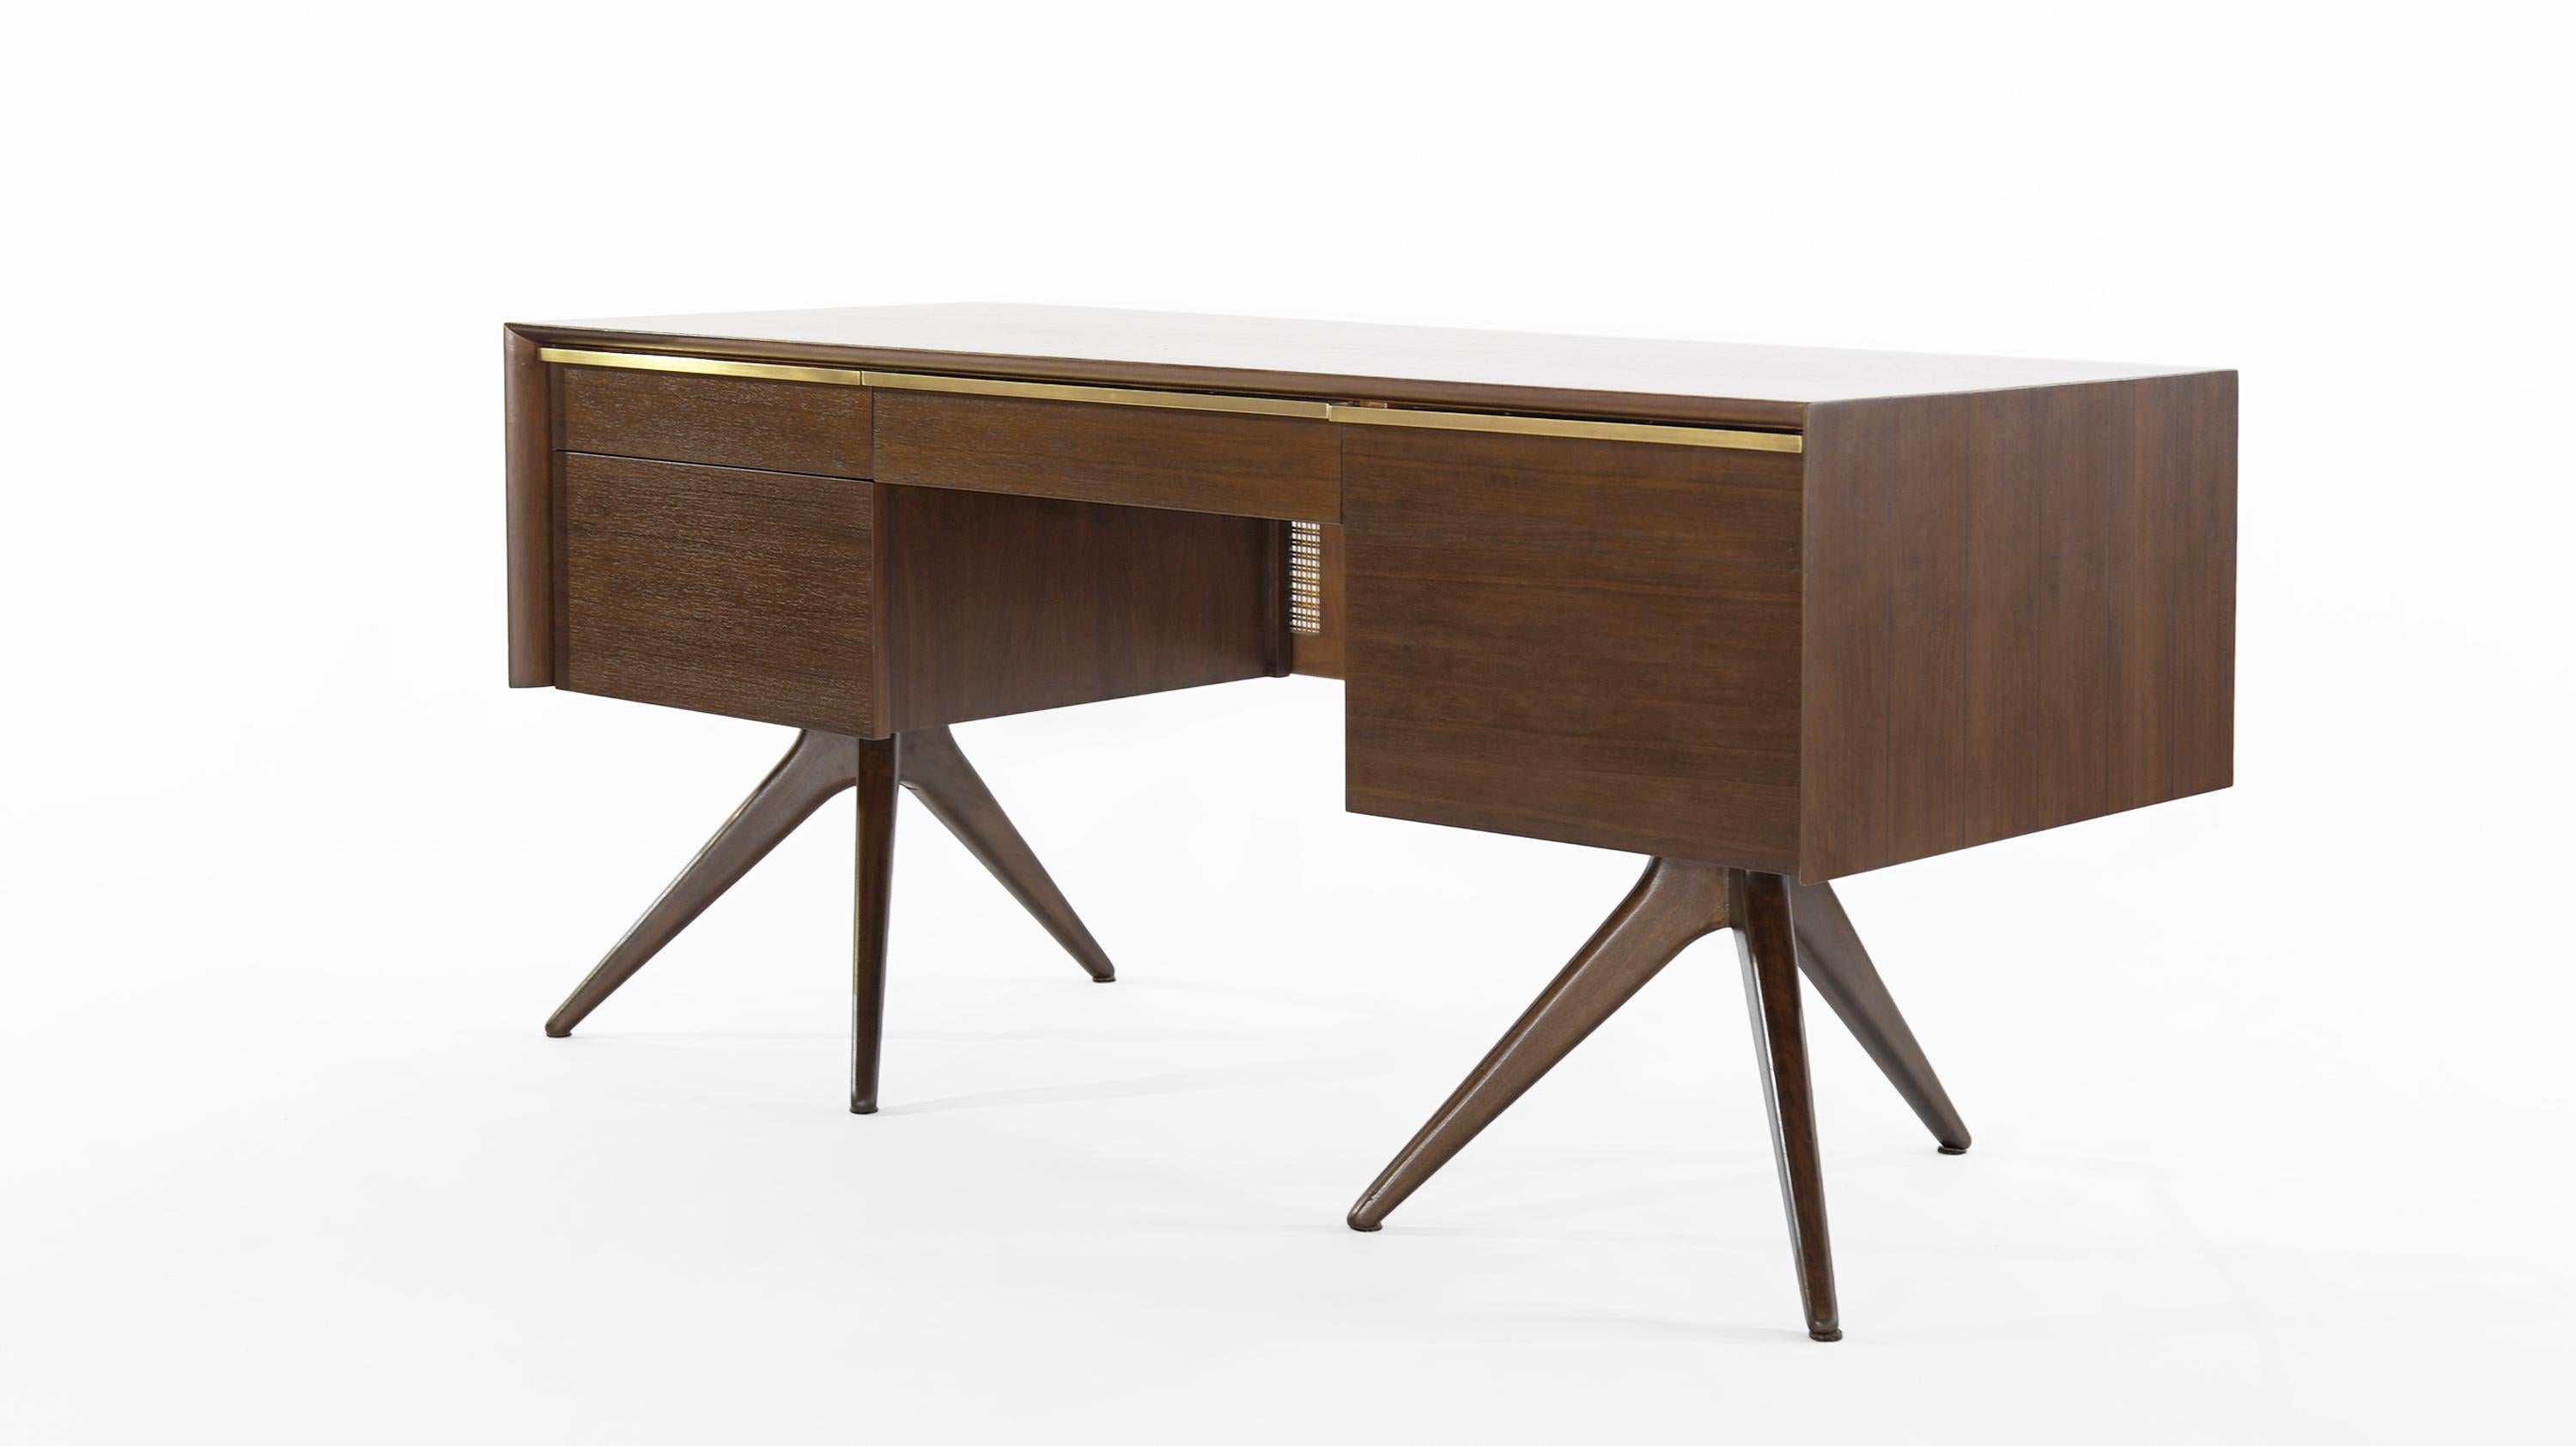 Impressive and rare walnut desk designed by Vladimir Kagan for Grosfeld House, NY, circa 1950s.

Walnut case design features ebony stripes, caned back and brass hardware. 

Completely restored to back its original glory, drawers slide smoothly